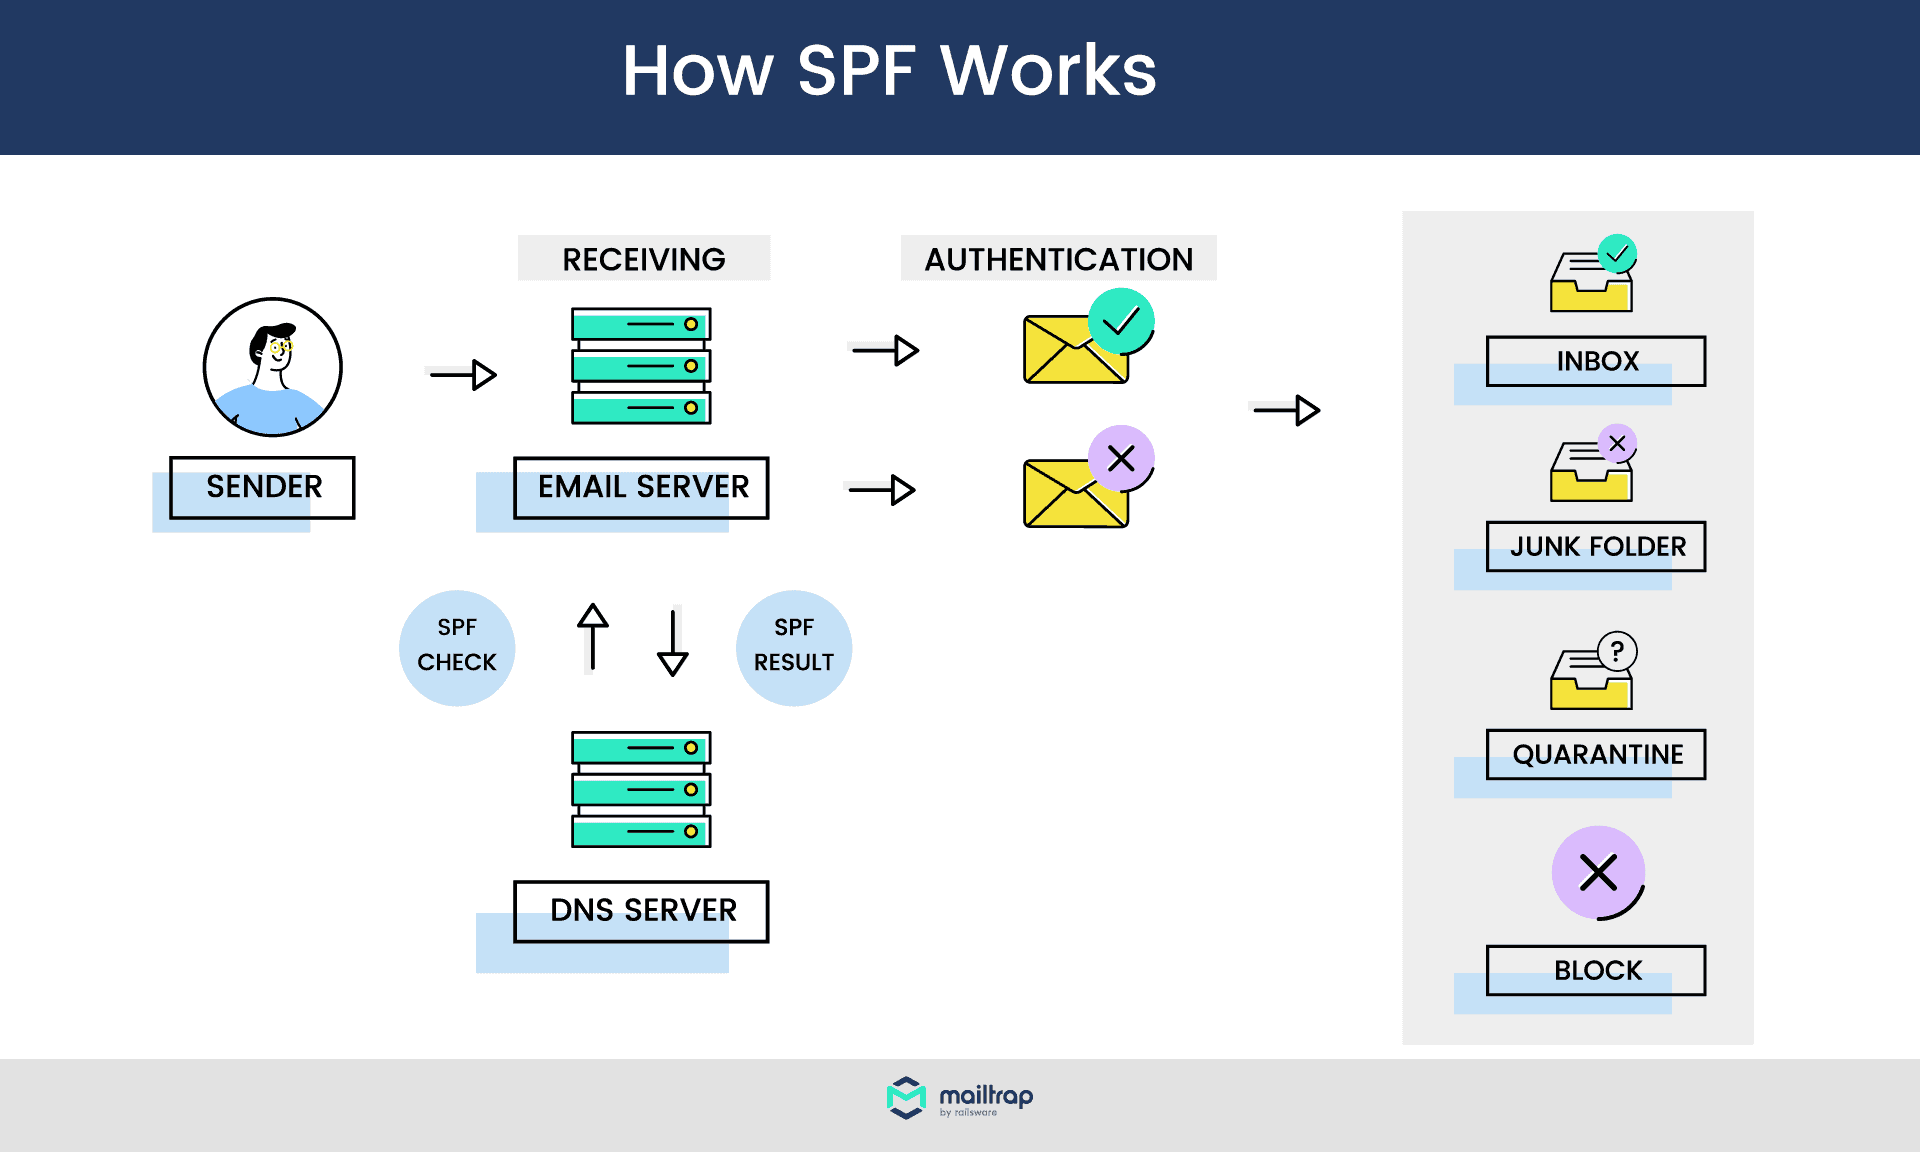 How SPF works